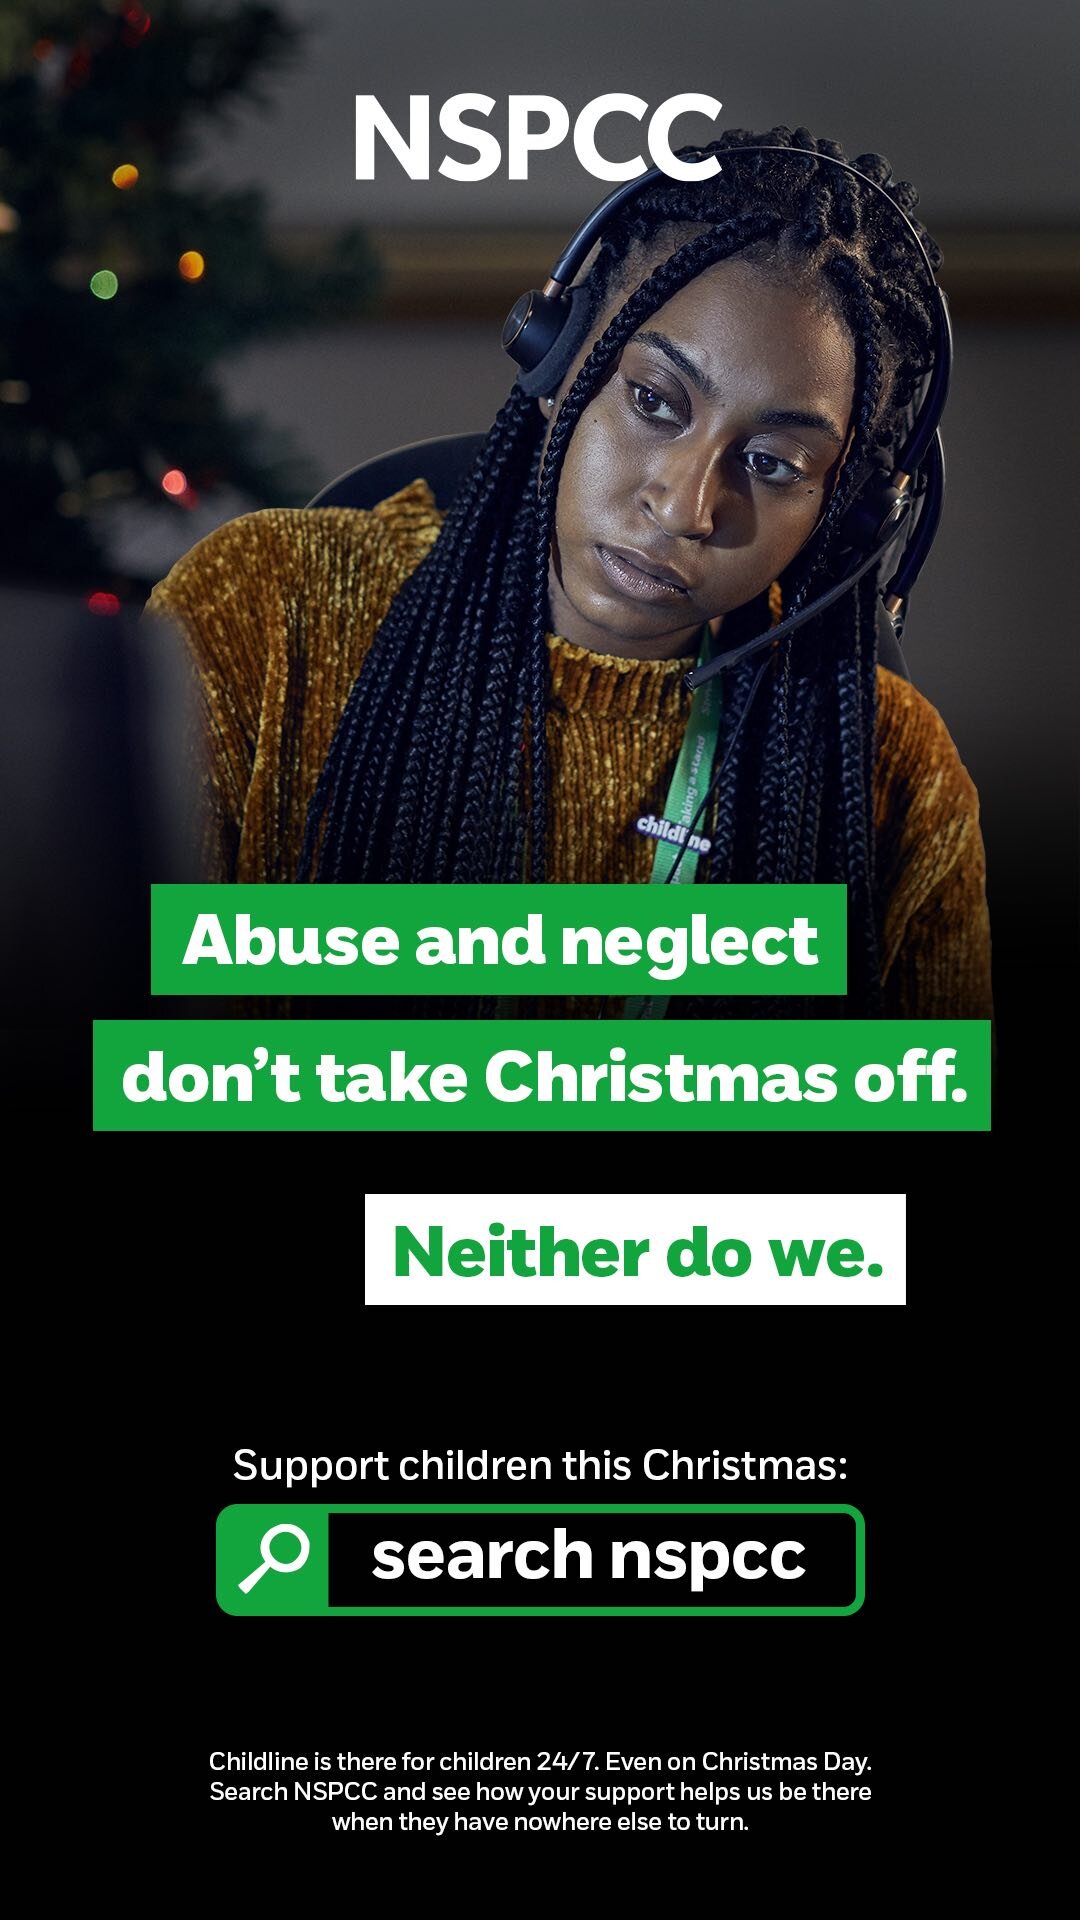 NSPCC_ROADSIDED6_Counselor_AbuseAndNeglect_YYMMDD copy.jpg